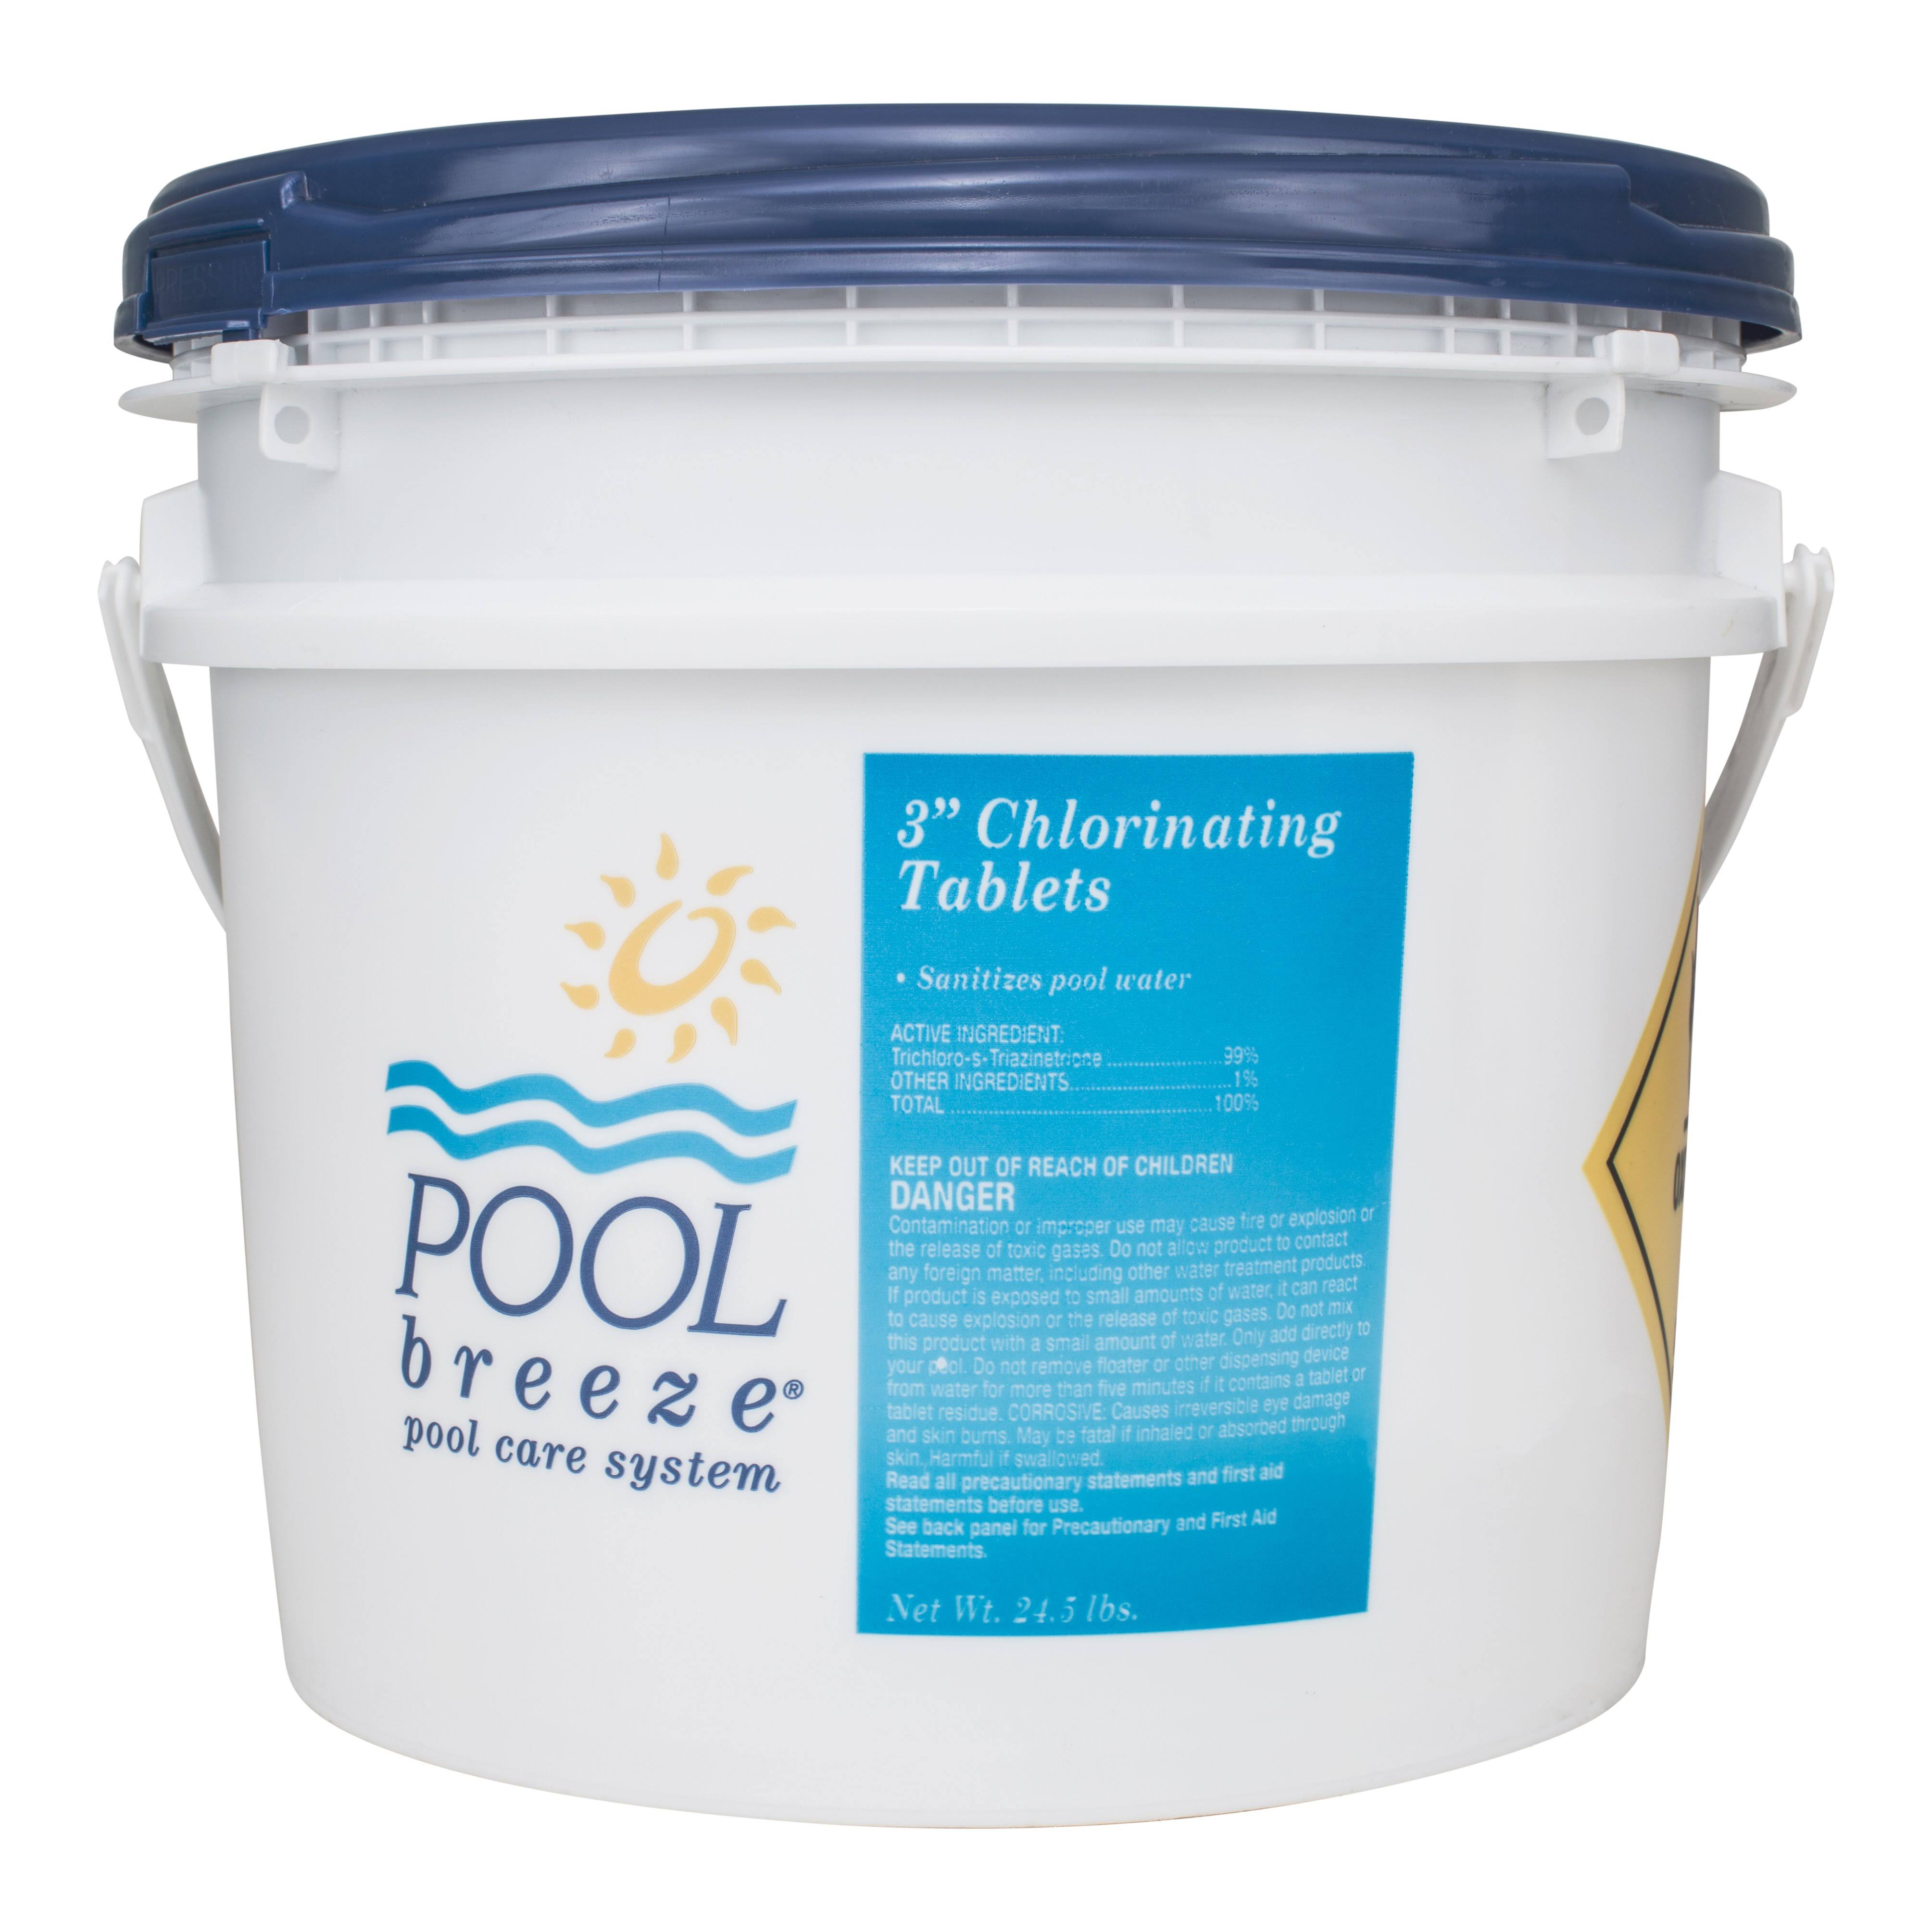 Pool Breeze Pool Care System Chlorinating Chemicals 24.5 lb.